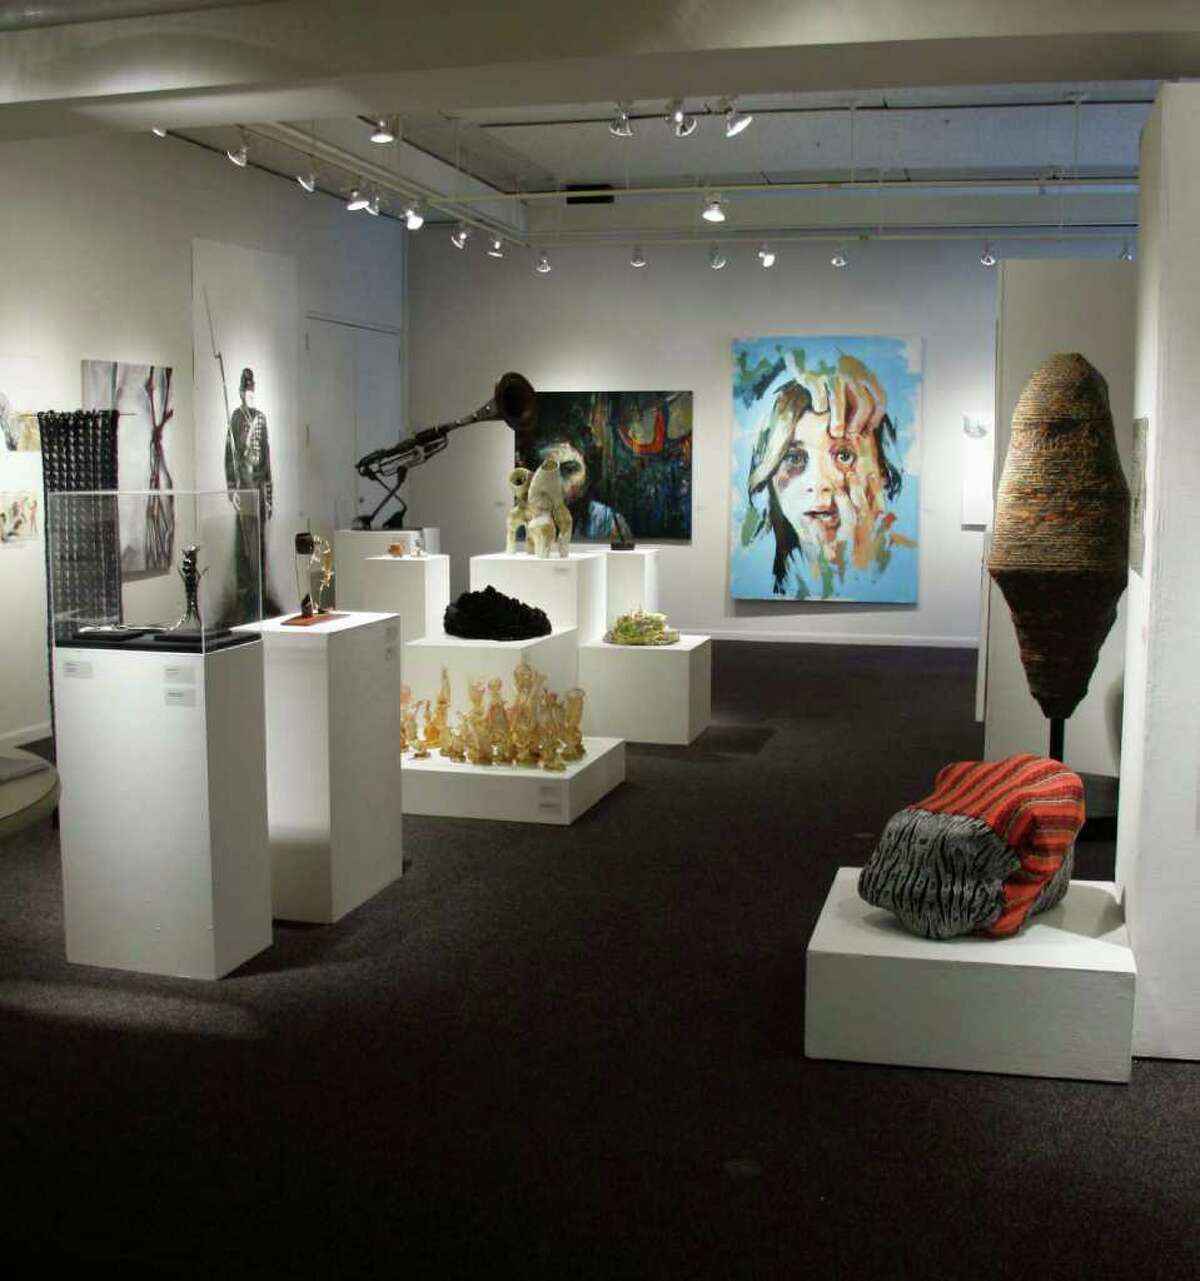 SKIDMORE COLLEGE The annual Skidmore Student Exhibition, sponsored by the college?s studio art department, will be on exhibit in the Schick Art Gallery, Saratoga Springs, from Thursday through March 4. An opening reception will take place 5:30 to 7 p.m. Thursday.